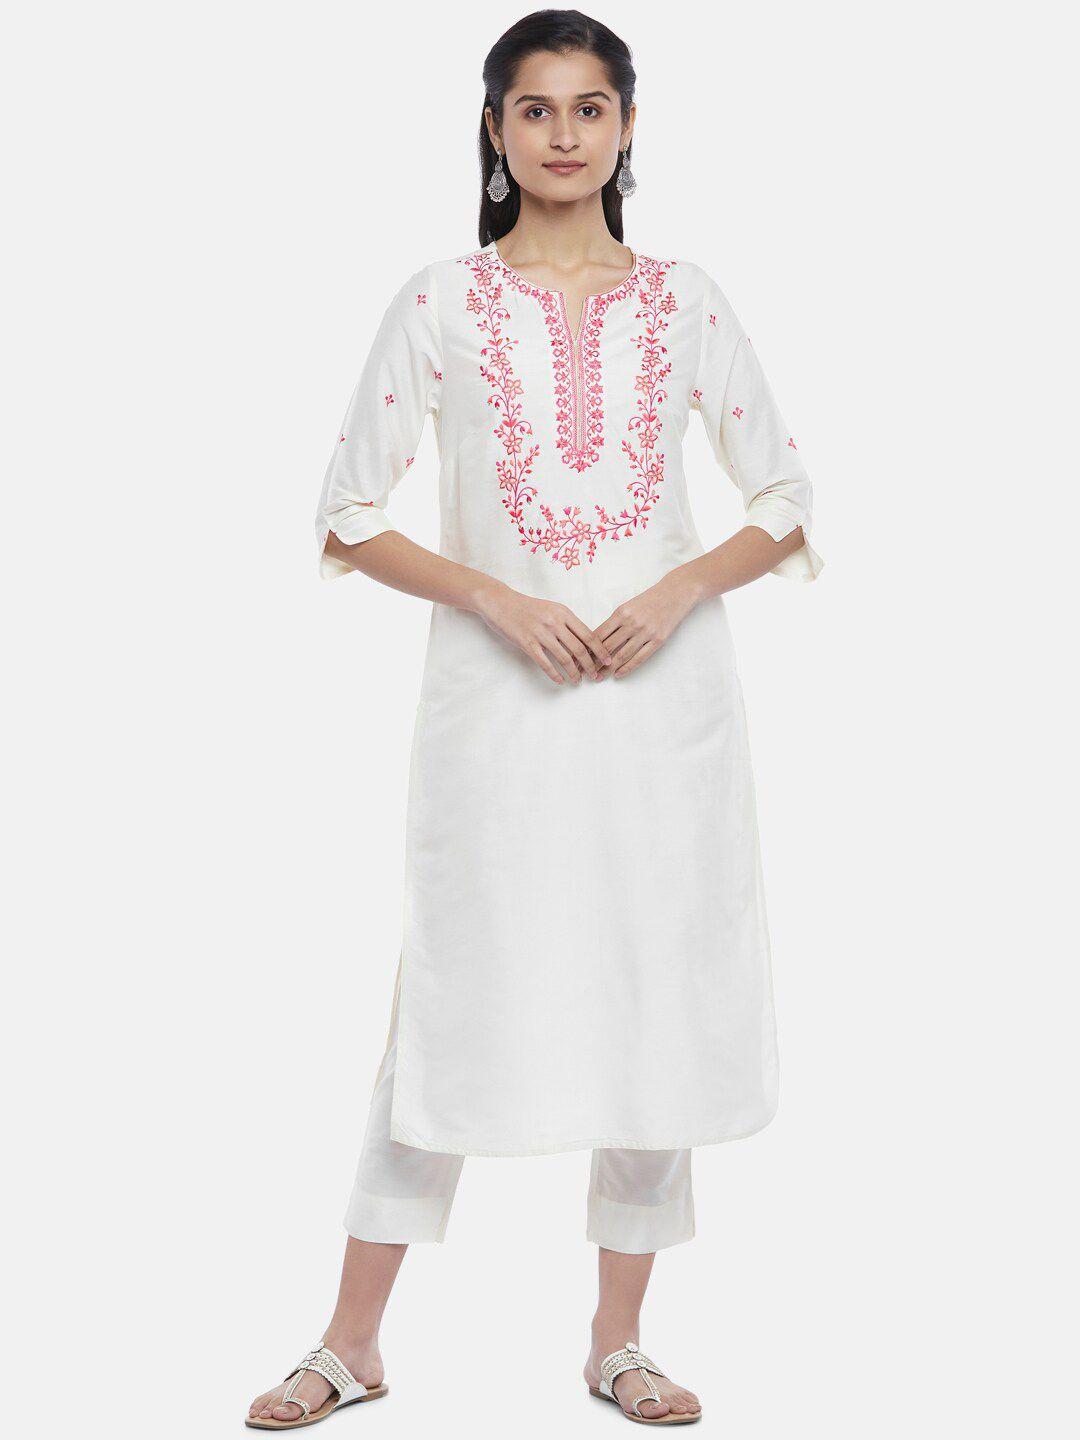 rangmanch by pantaloons women white floral embroidered kurta with trousers